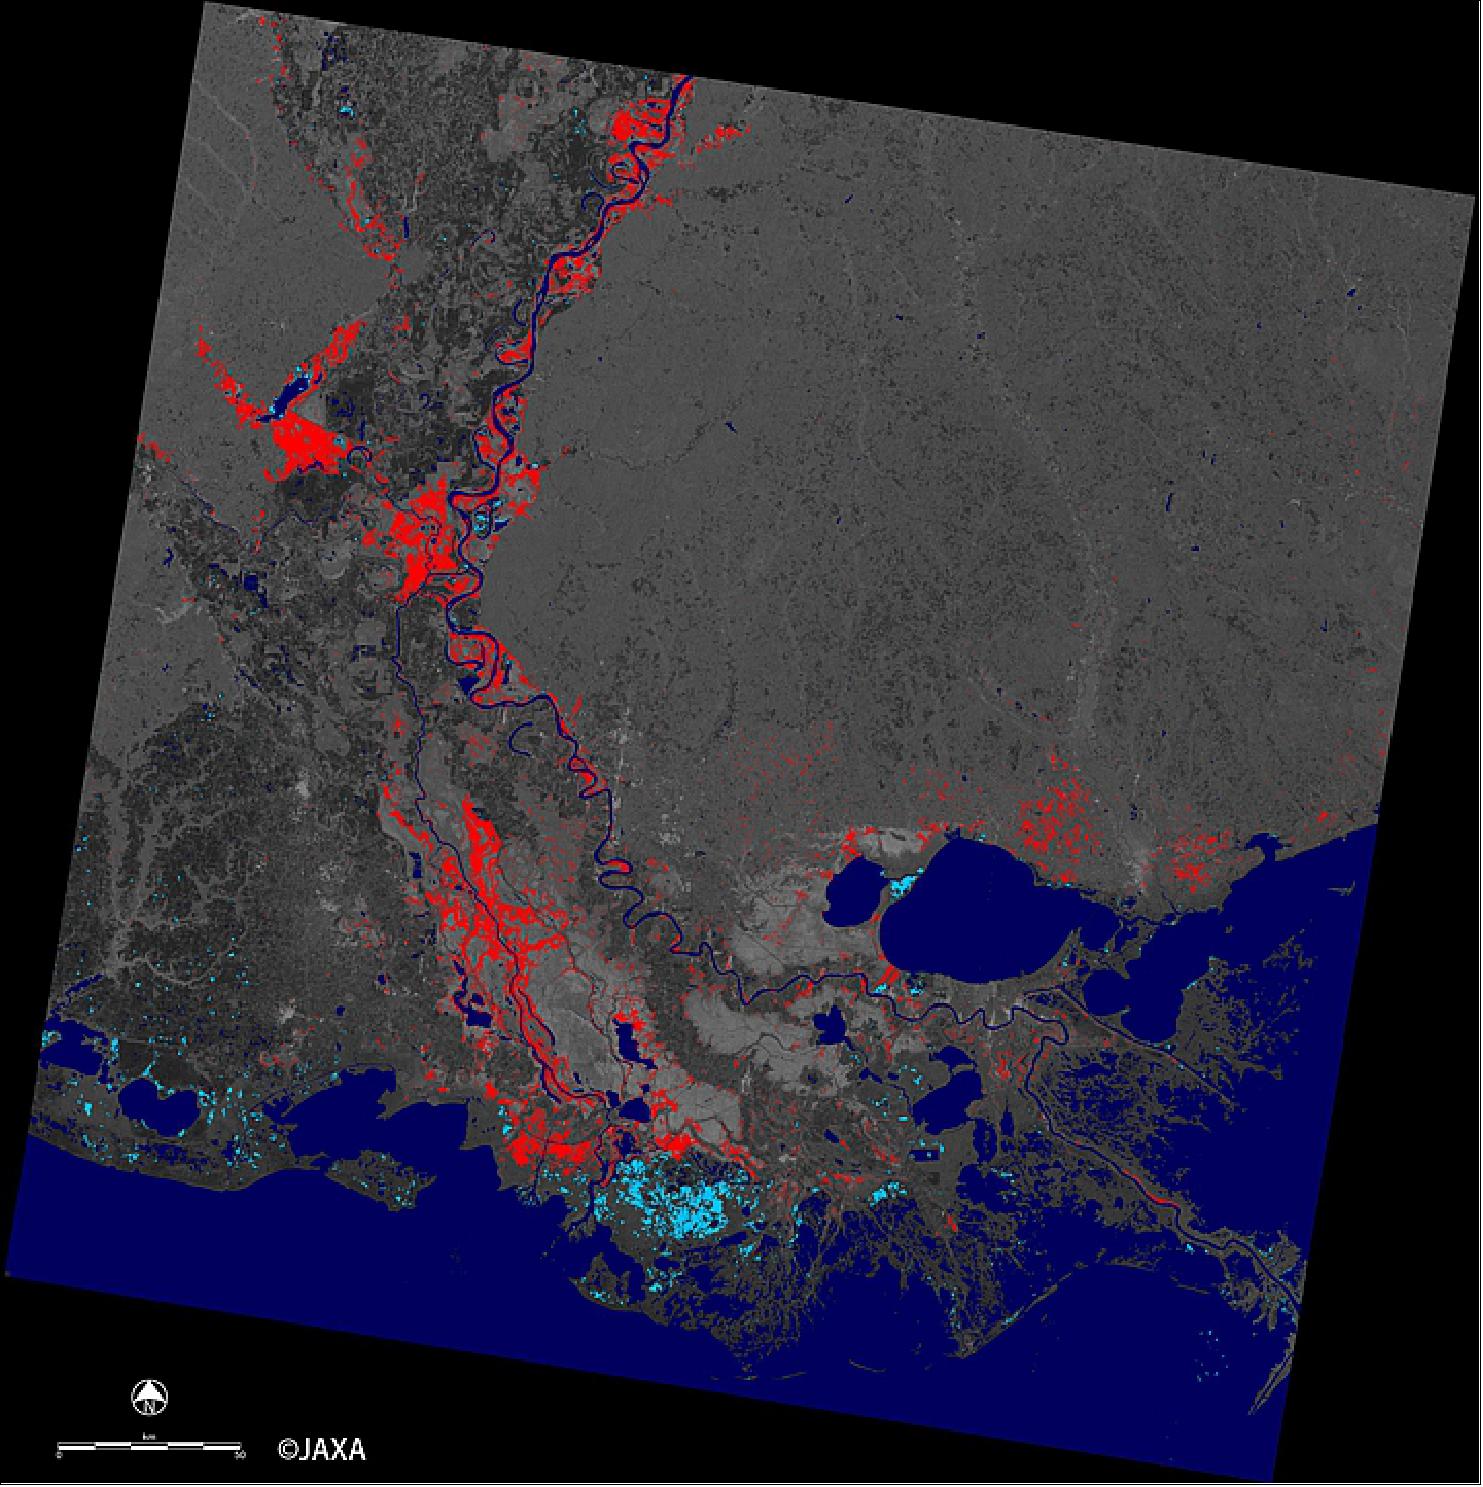 Figure 42: On Jan. 16, 2016, JAXA acquired this estimated inundation map of the Mississippi in the New Orleans region (image credit: JAXA/EORC)